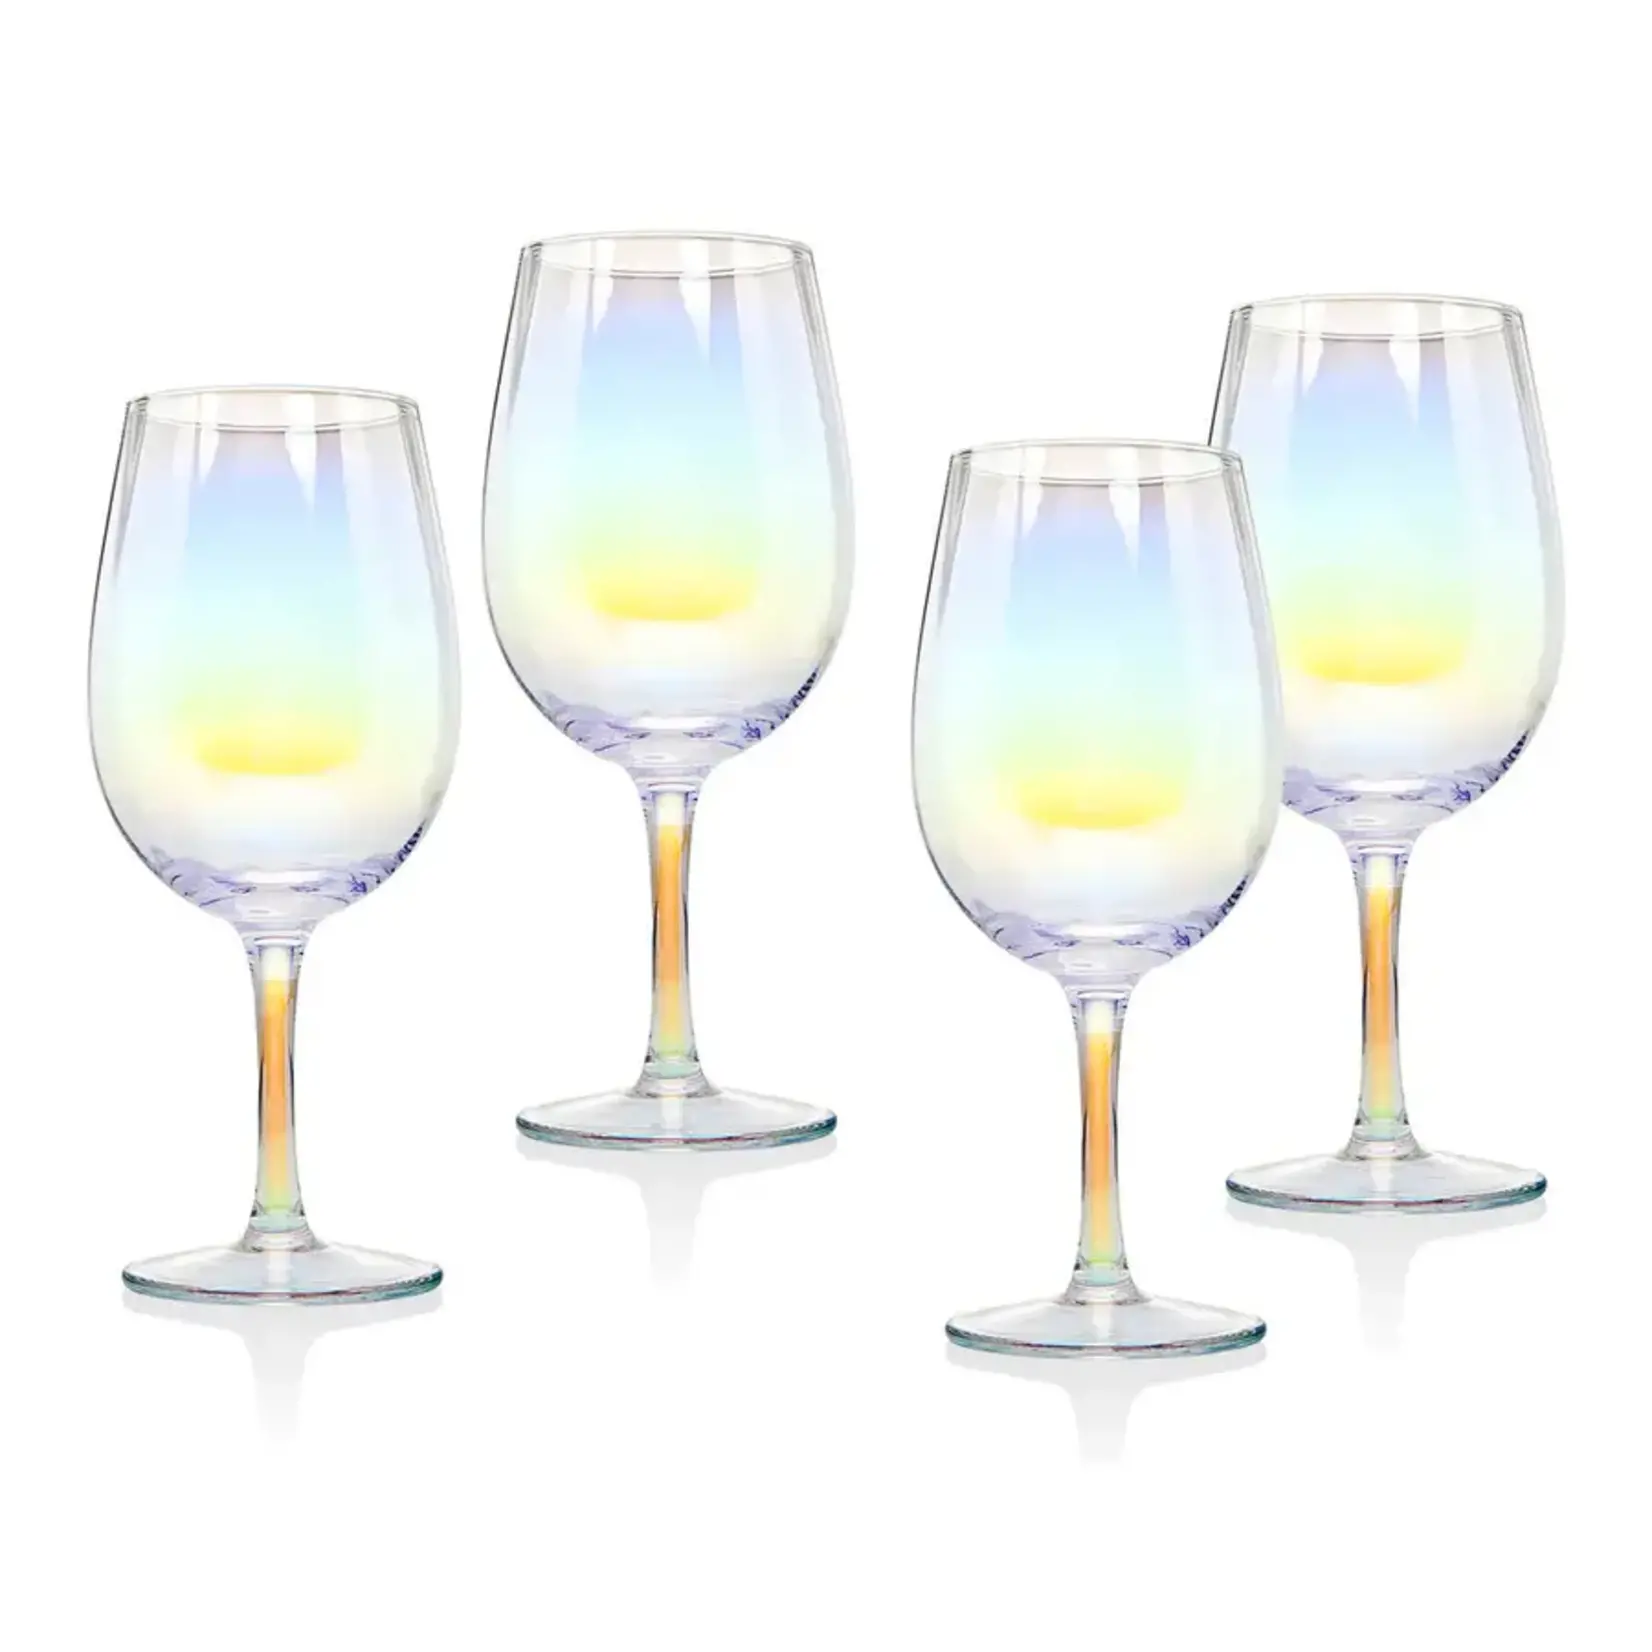 Montery Goblets - Set of 4